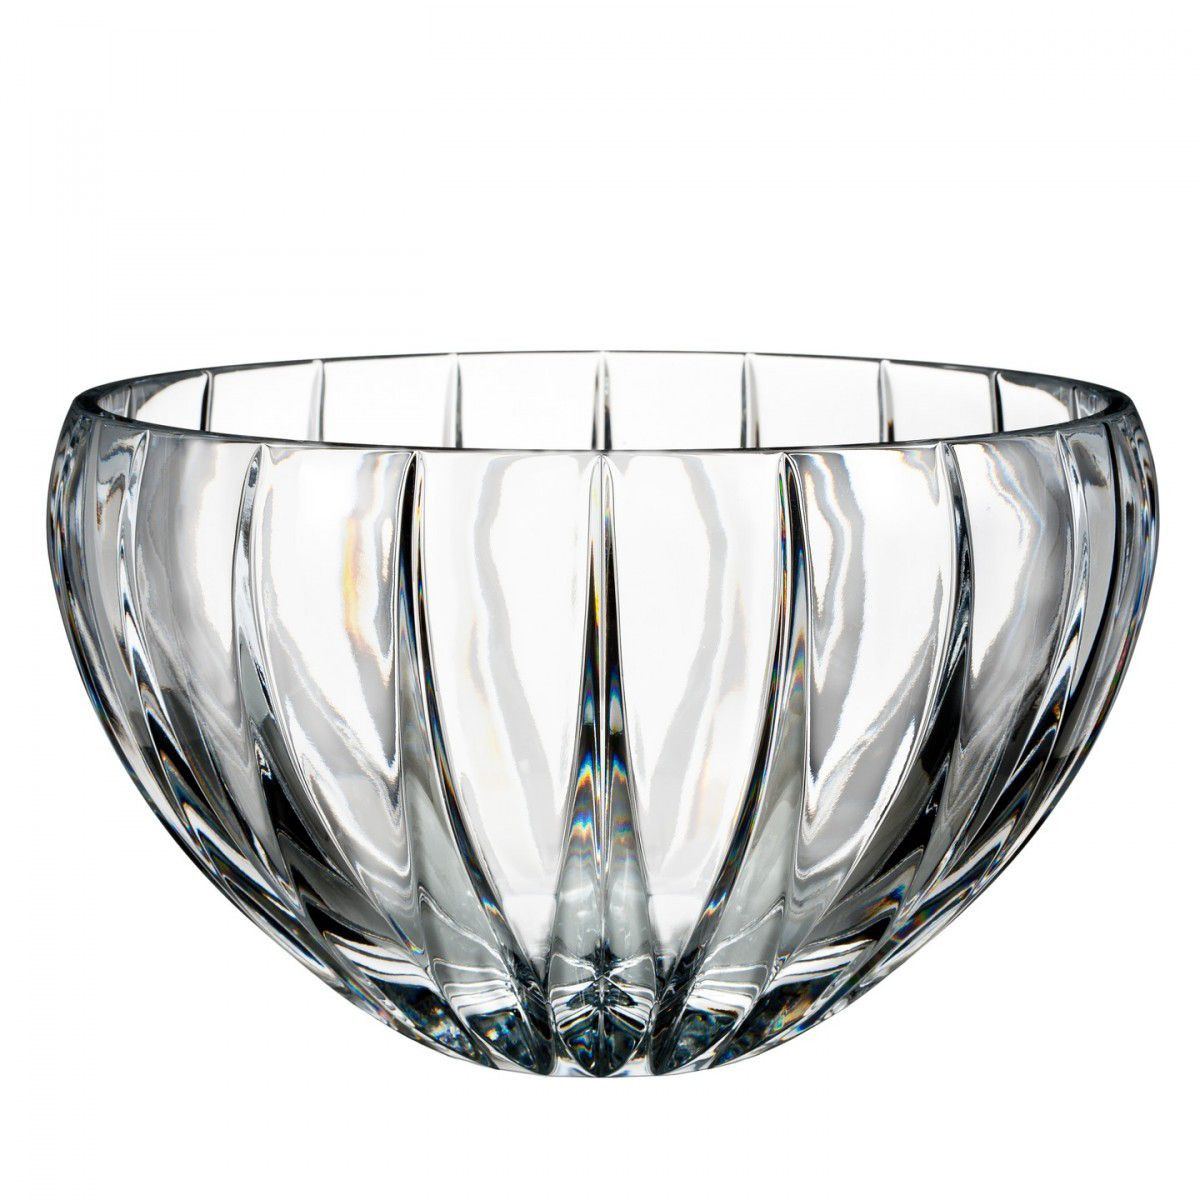 waterford balmoral vase of marquis by waterford crystal phoenix 10 crystal bowl glass throughout marquis by waterford crystal phoenix 10 crystal bowl